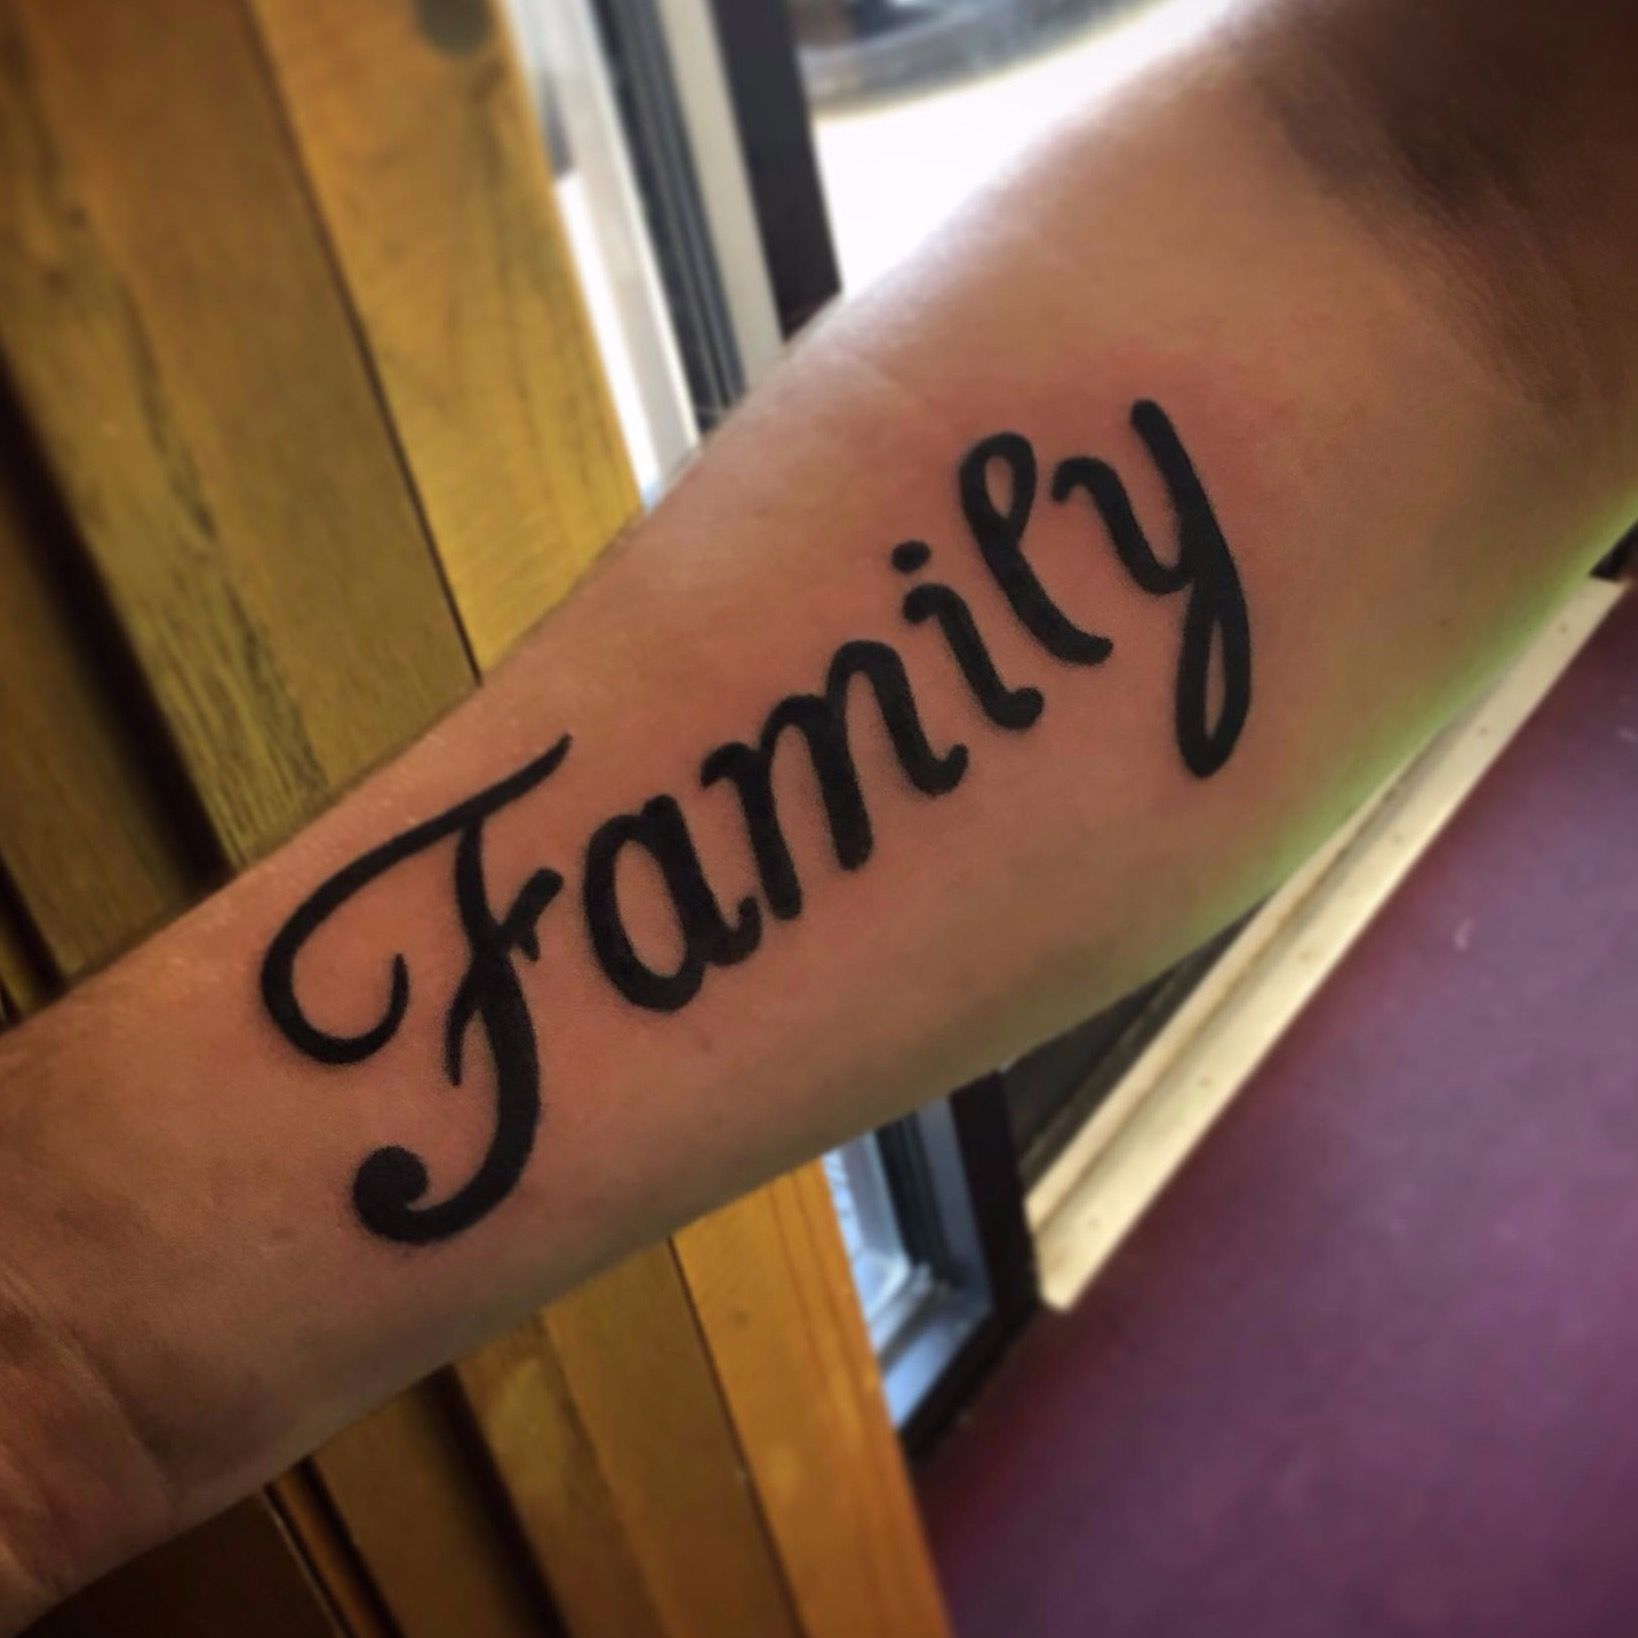 Pomona Tattoos  Piercing on Instagram Family simple script by  noberttattoos DM him to book an appointment or call the shop 9092631004  nobert family pomonatattoos